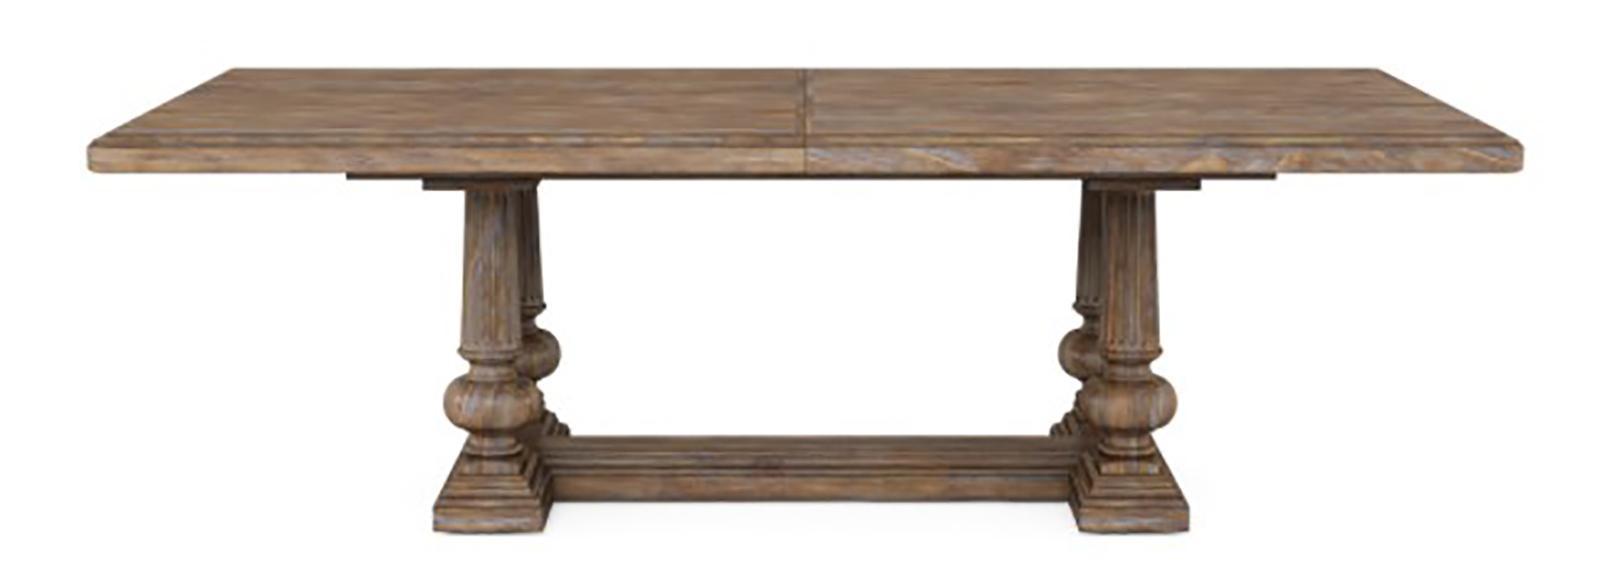 Furniture Architrave Trestle Dining Table in Rustic Pine